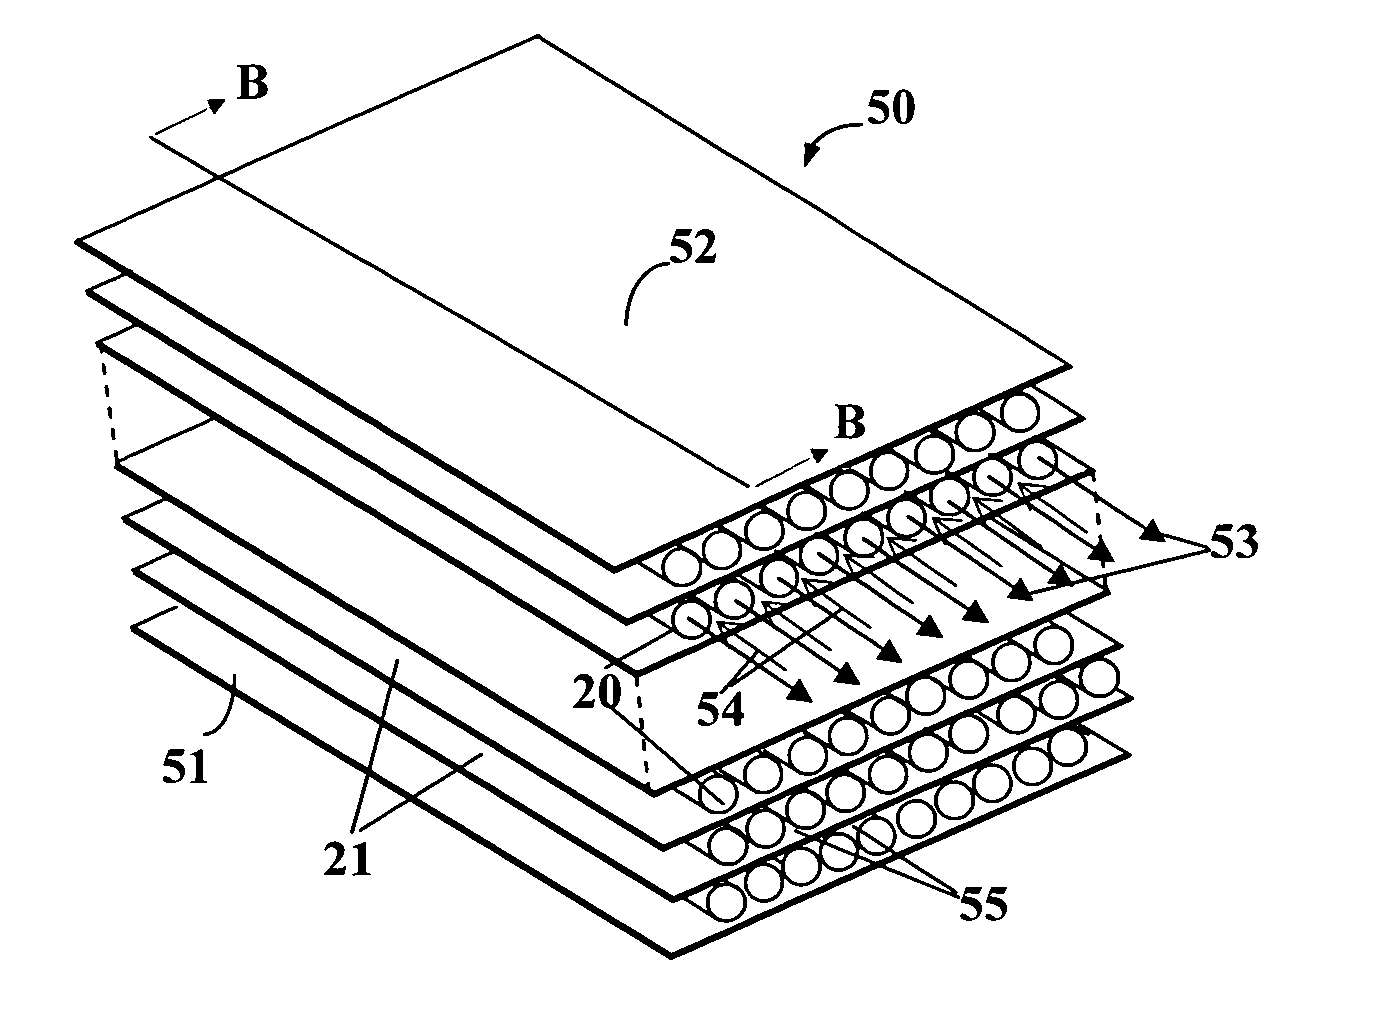 Cao fuel cell stack with large specific reactive surface area